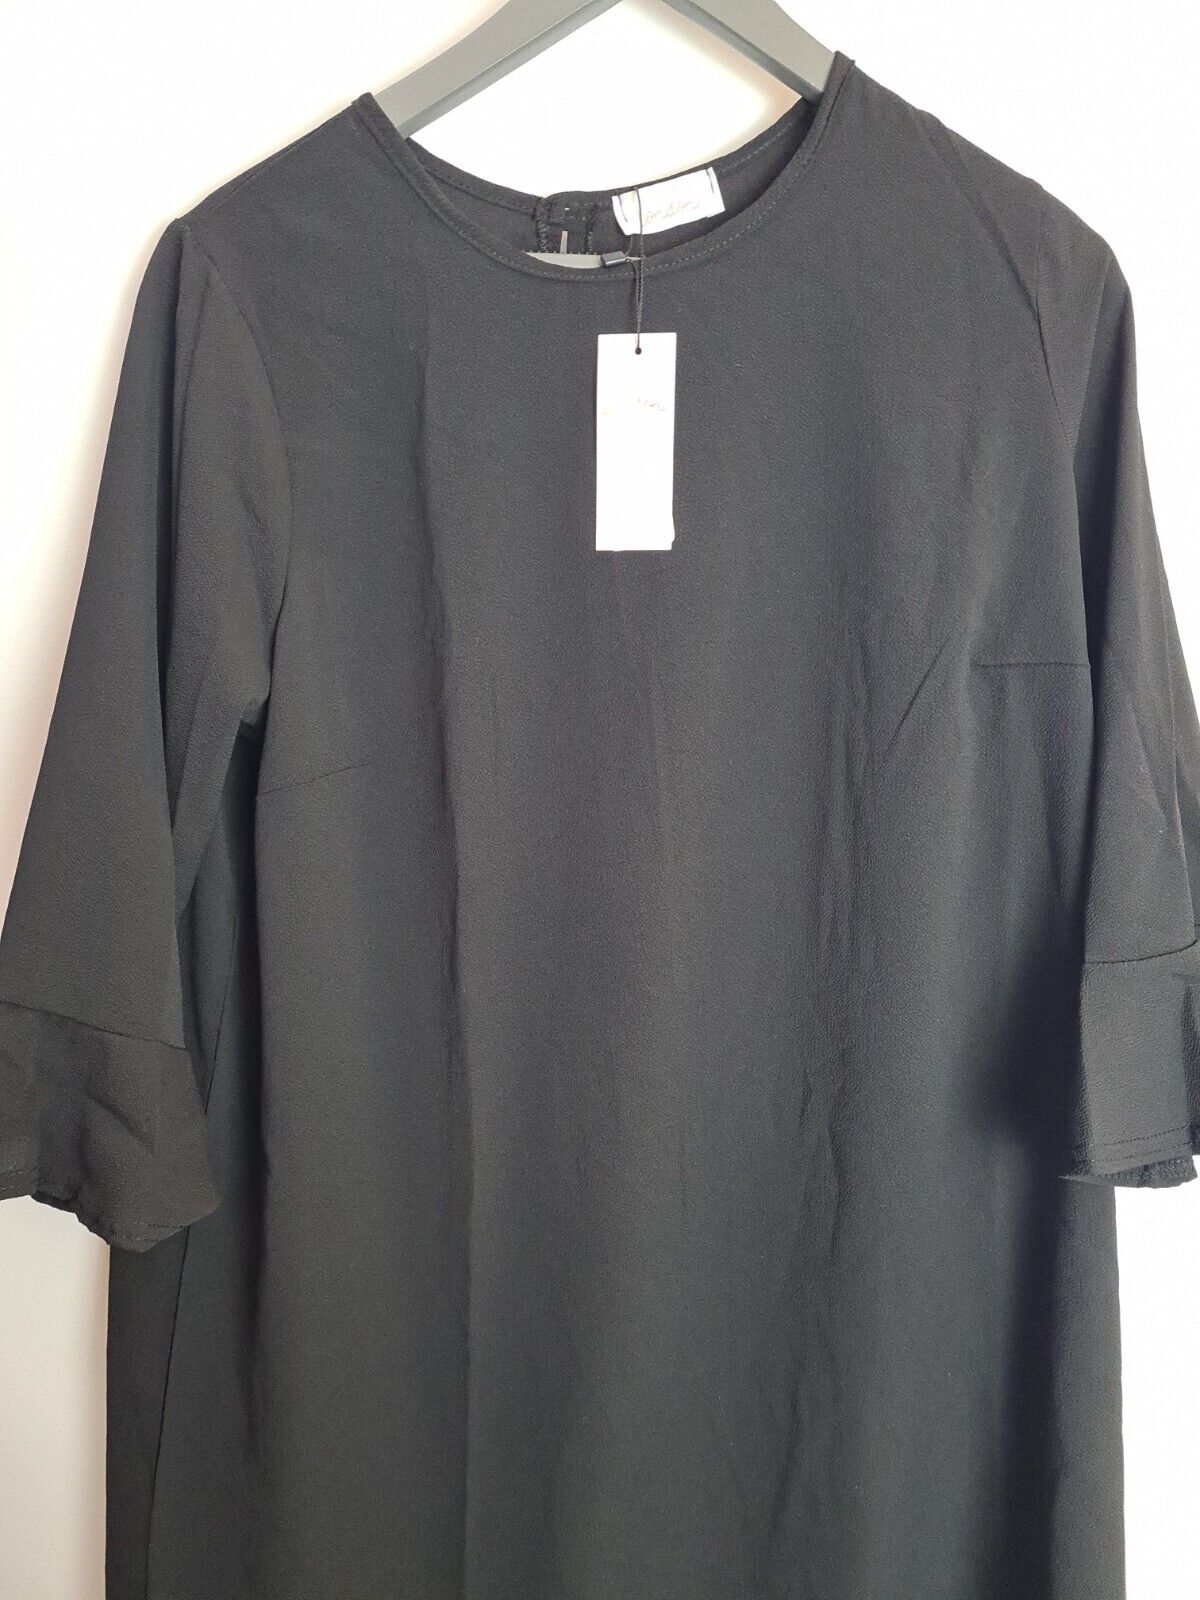 Yours Curve Black Flute Sleeve Tunic Top Size 18 **** V226